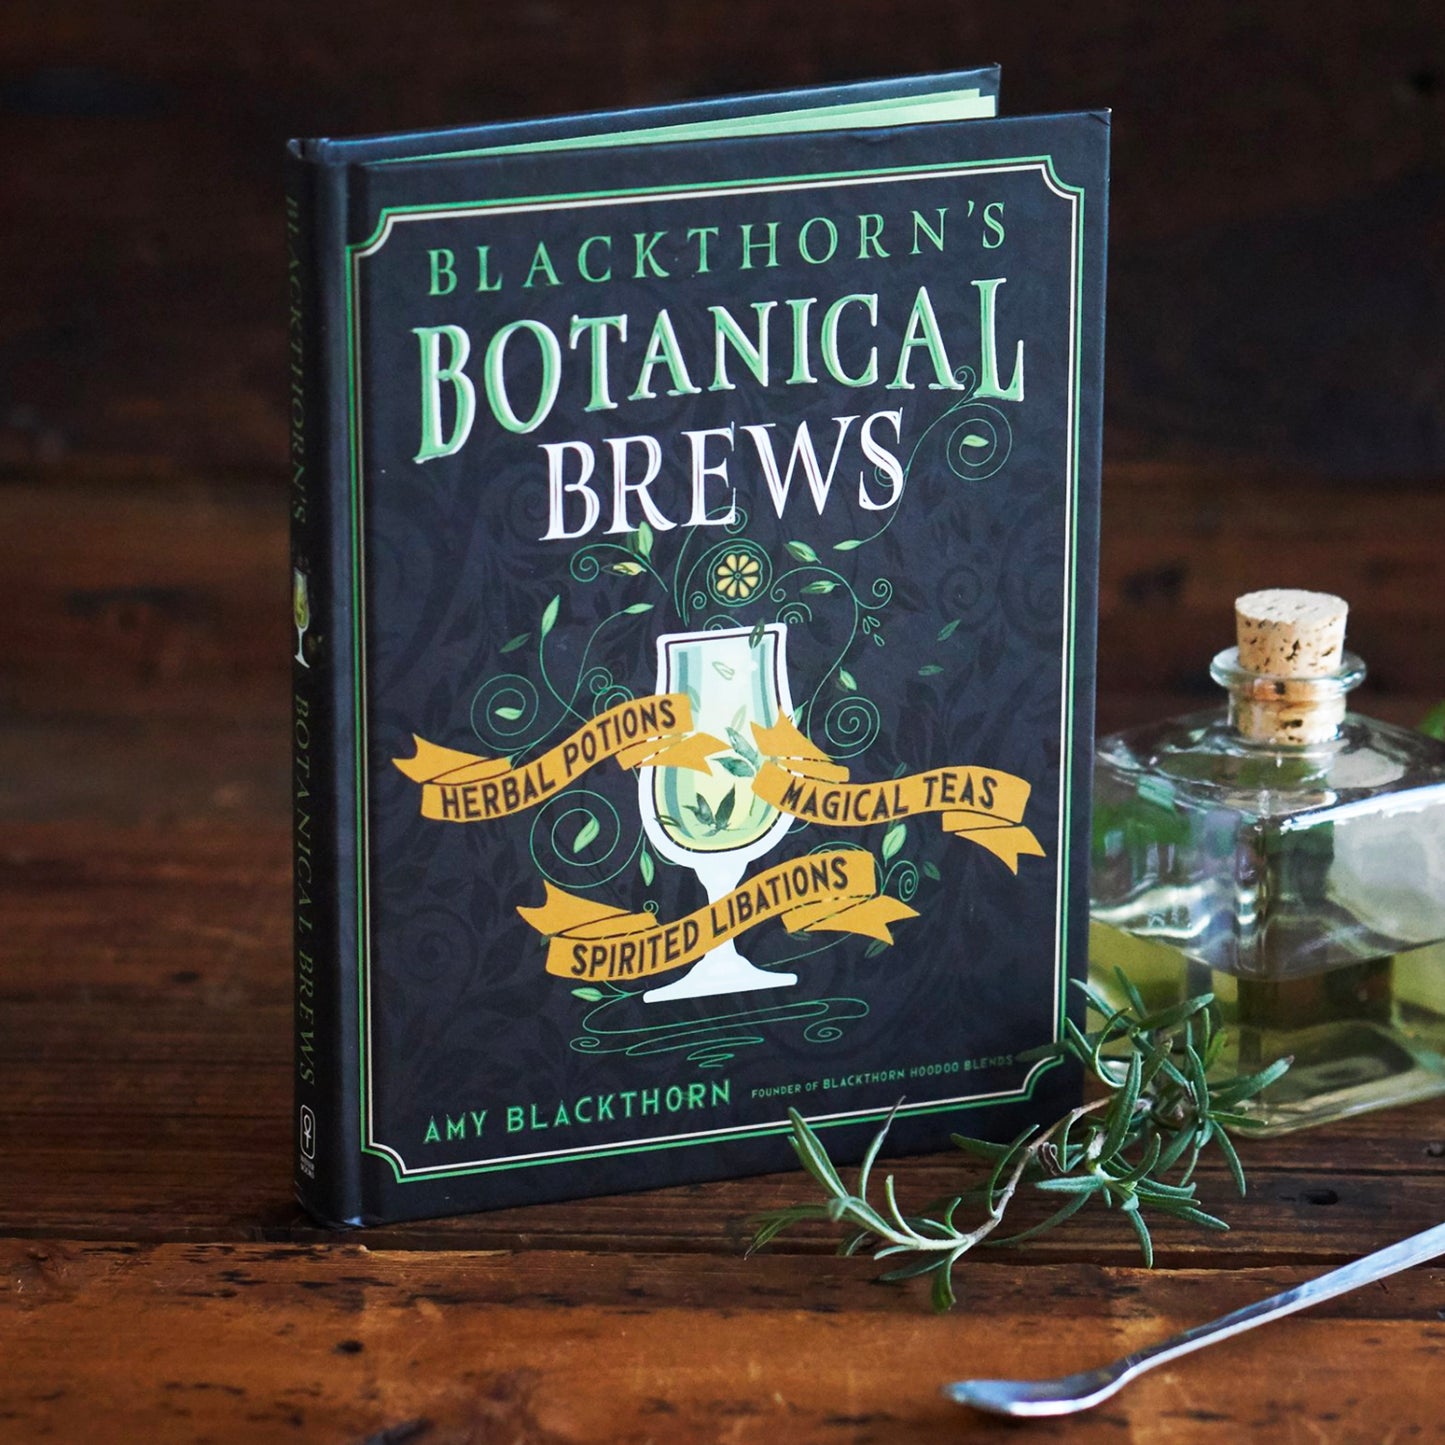 A black book on a wood table. A green and white border runs along the edges. At the top in green and white text is "blackthorn's botanical brews." In the center is a drawing of a white goblet with green liquid in in, with green vines surrounding it. At the sides of the goblet are yellow banners, with black text saying "herbal potions, magical teas, spirited libations." Next to the book is a glass vial, a sprig of herbs, and a metal cocktail stirrer.